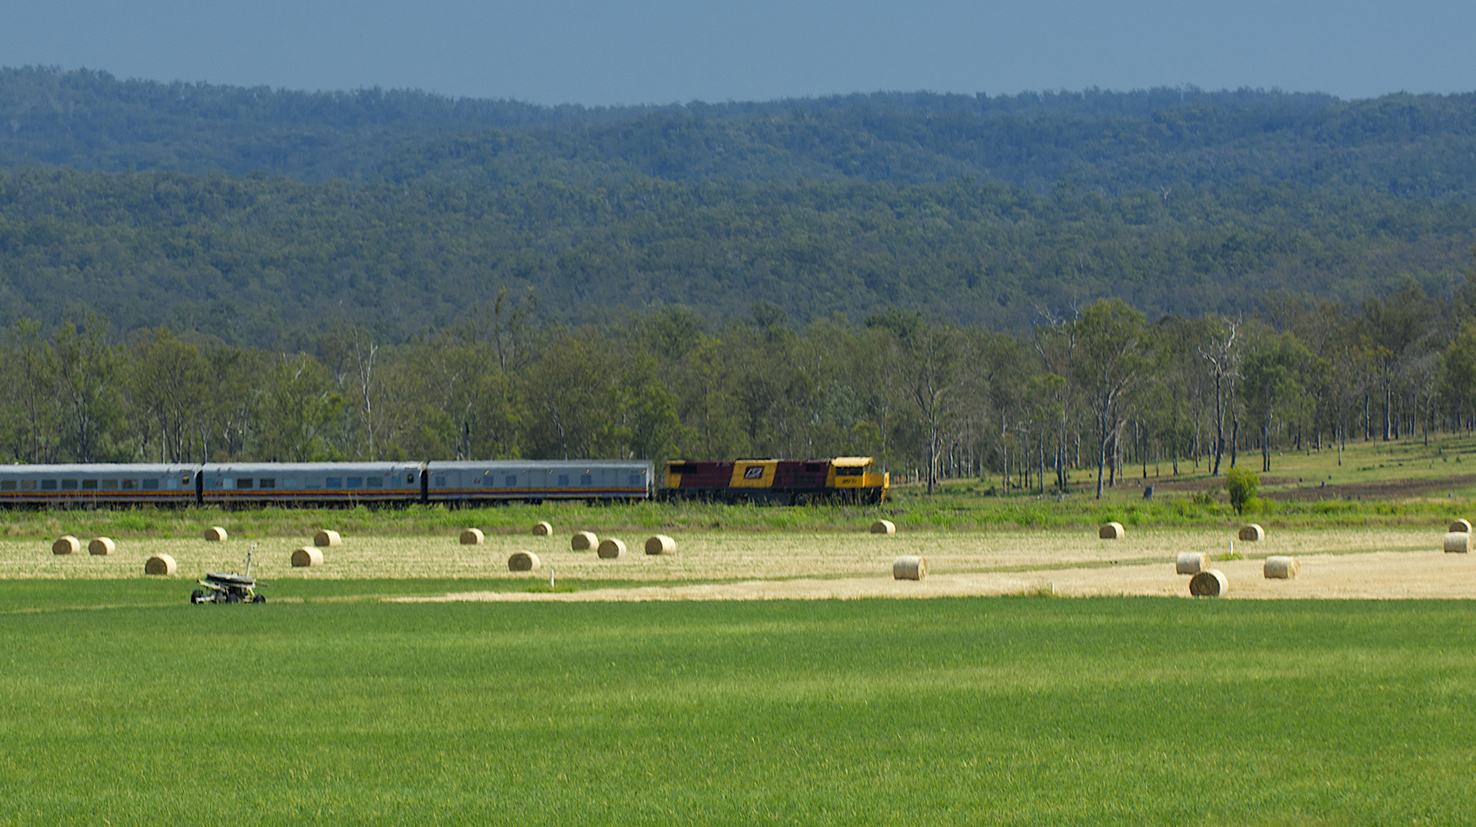 travel by train in queensland